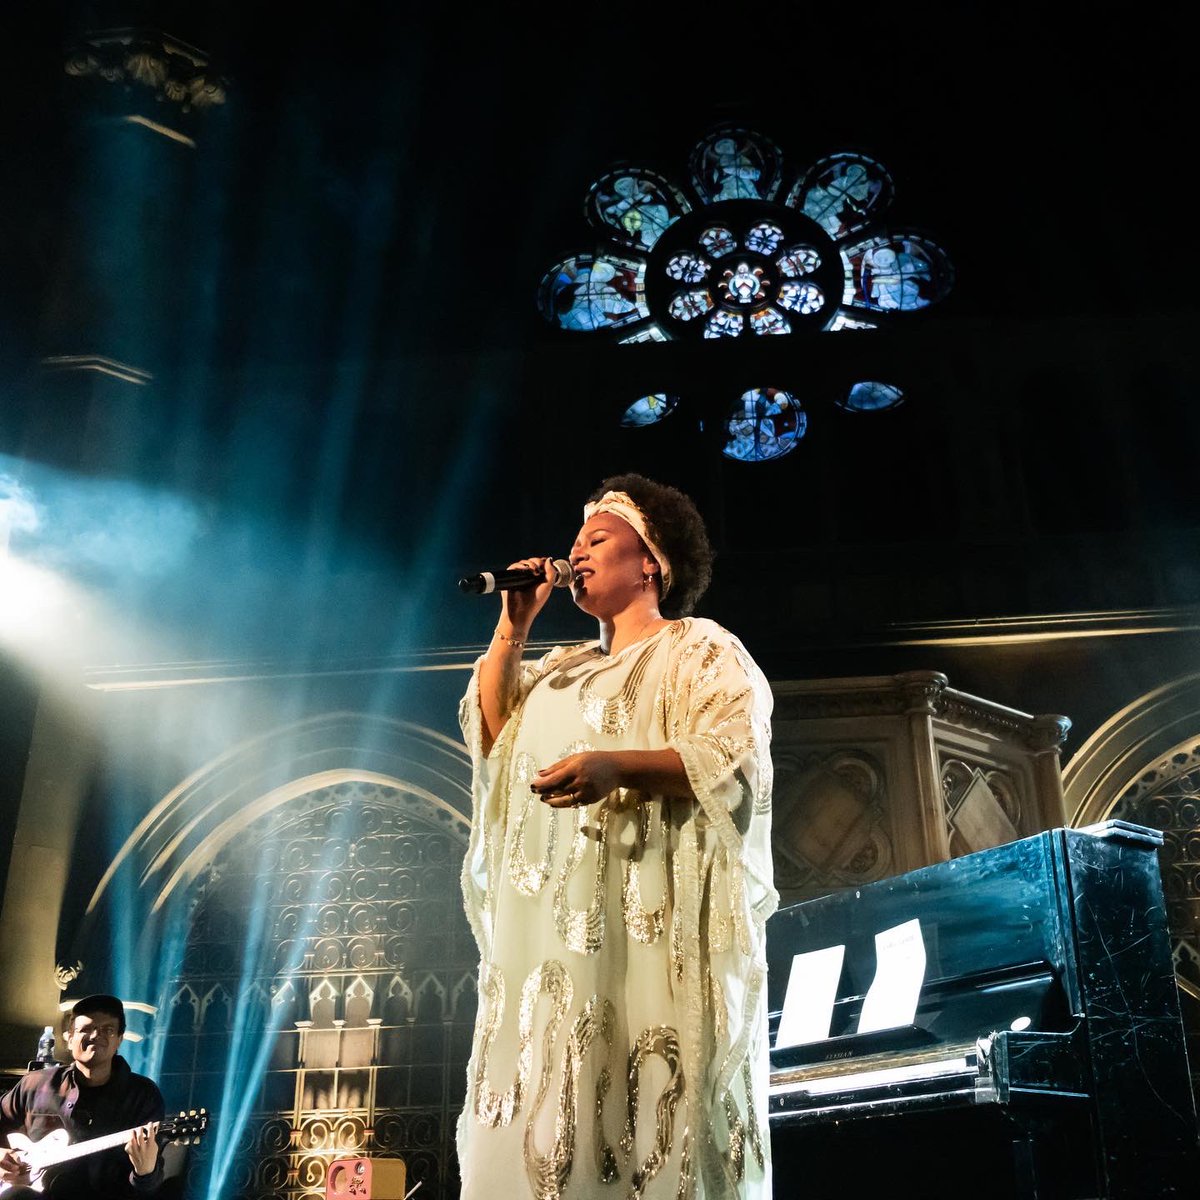 A totally magical evening at @UnionChapelUK last night. Thank you to everybody who came, it was such a pleasure to perform for you in such an exquisite venue!! Big love to @ZaweAshton for hosting the Q&A - loved sharing the stage with you! 💘 📸 Katie Malcolmson